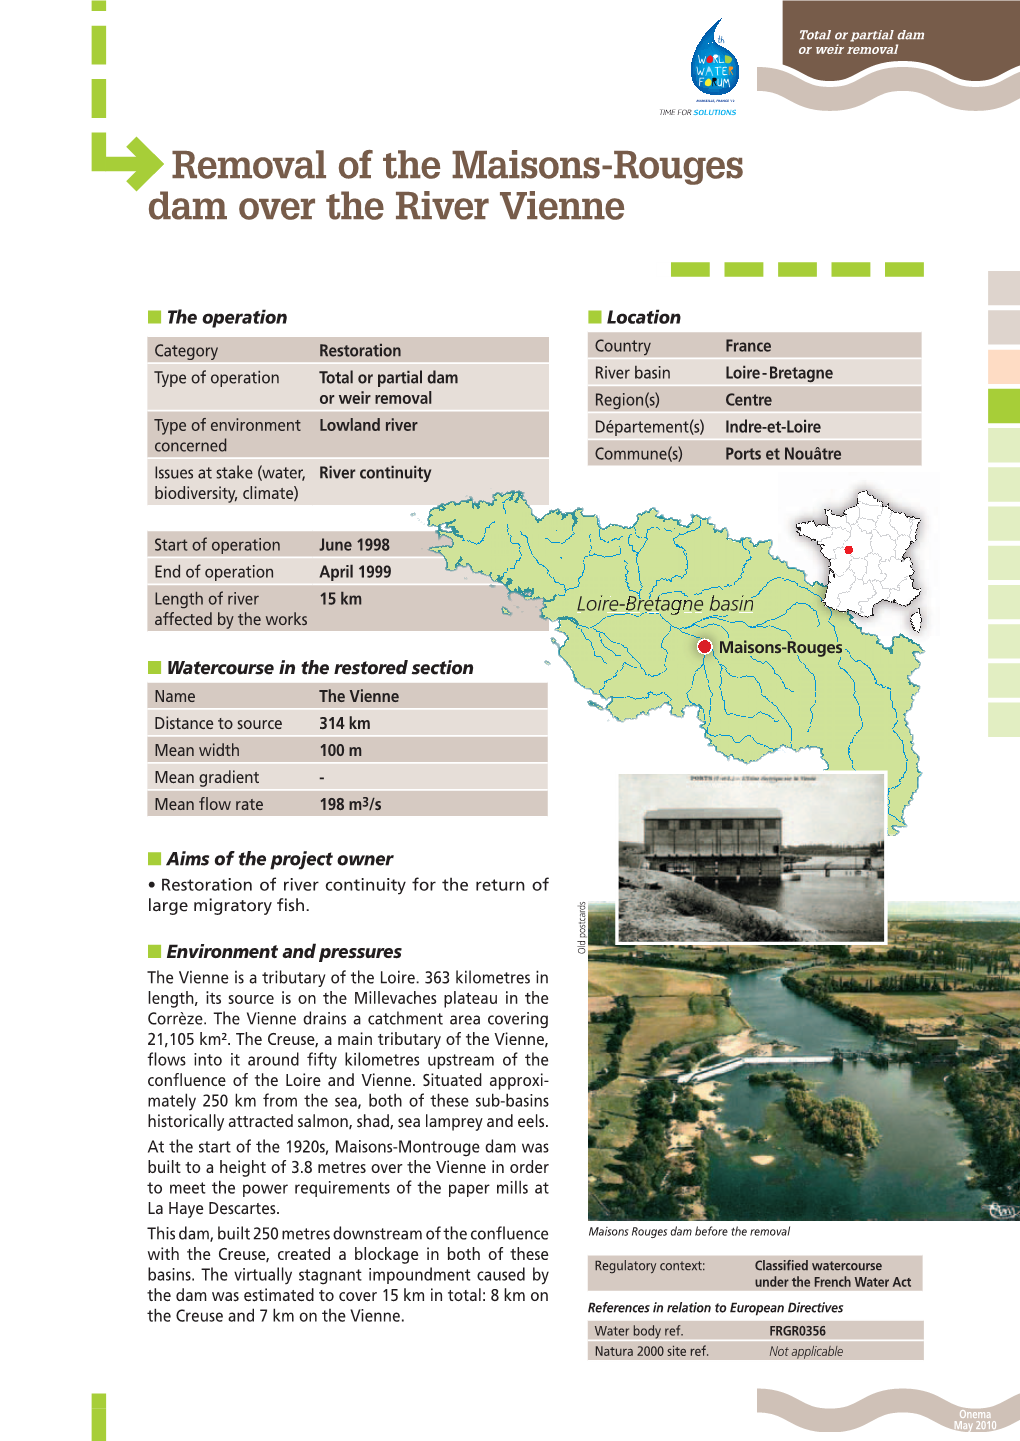 Removal of the Maisons-Rouges Dam Over the River Vienne